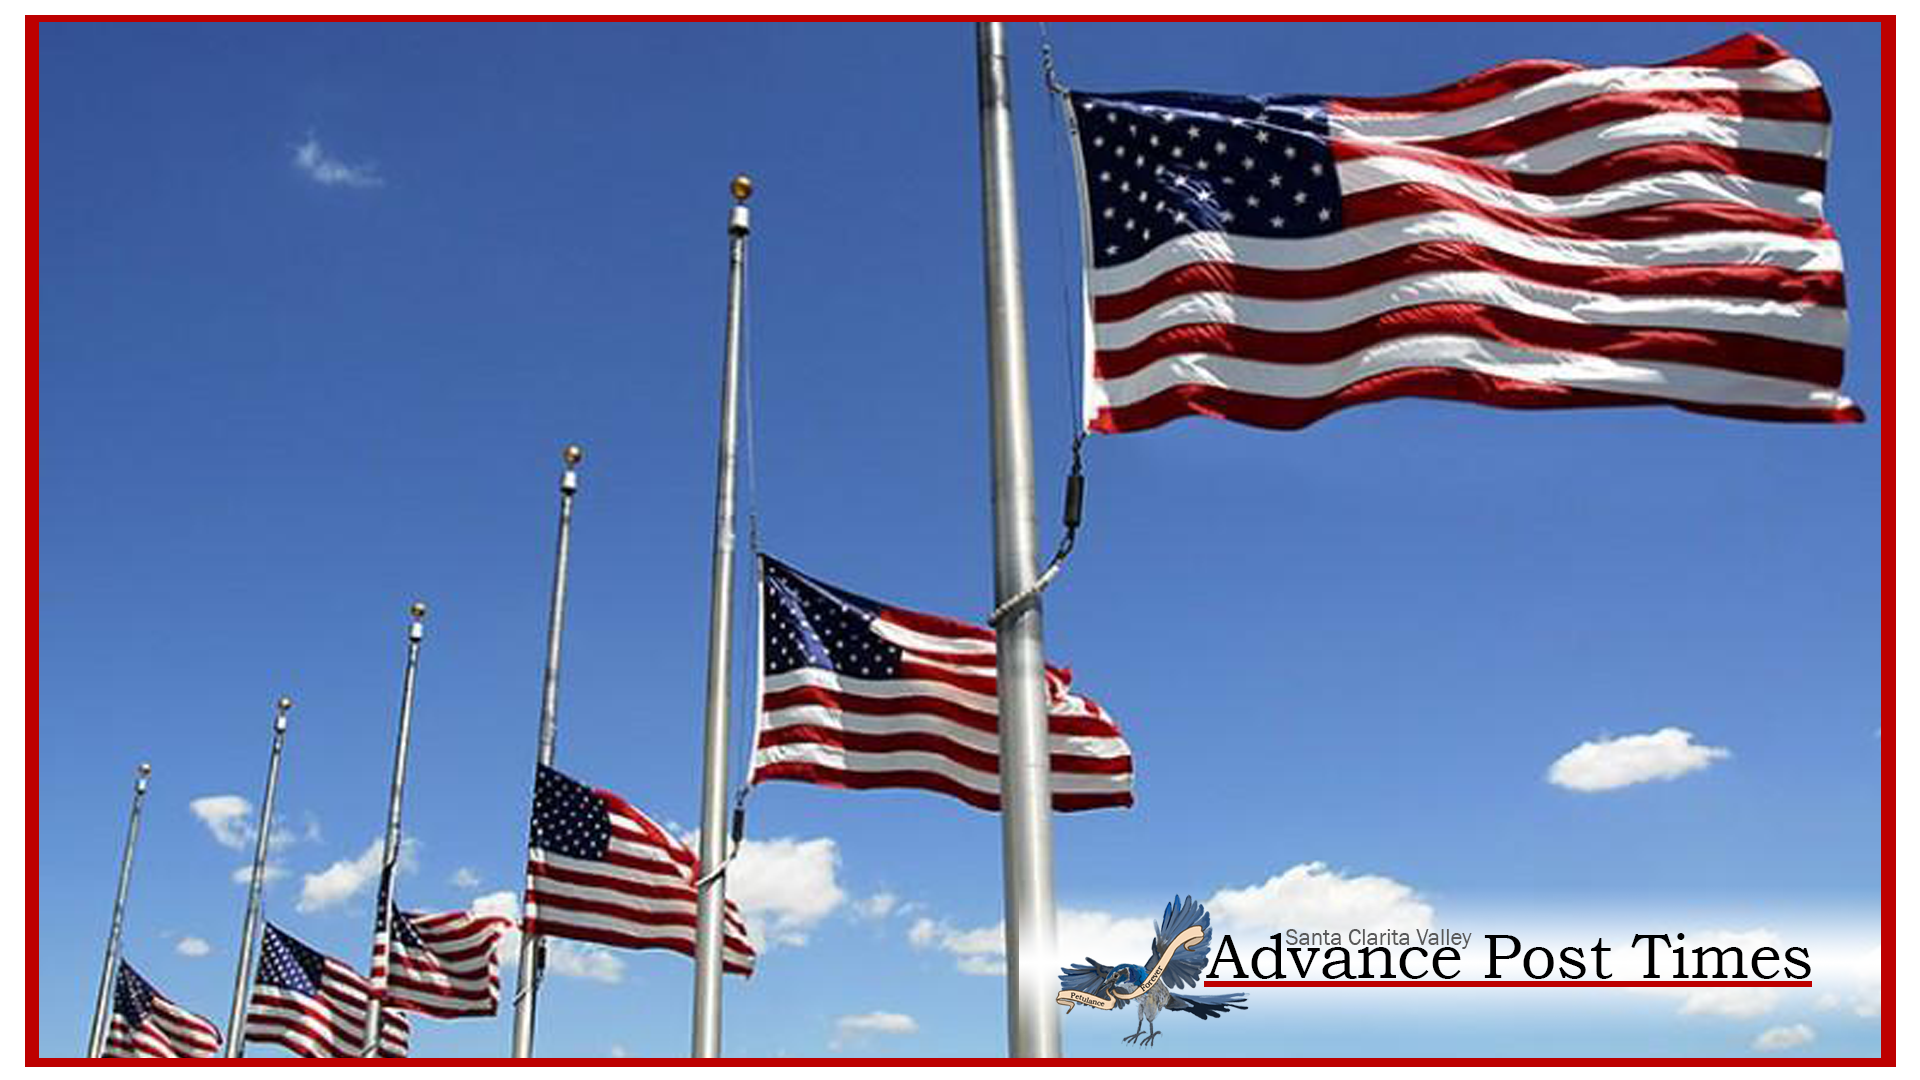 Flags Ordered to Half-Staff Ahead of The Next Inevitable, but Preventable, Tragedy